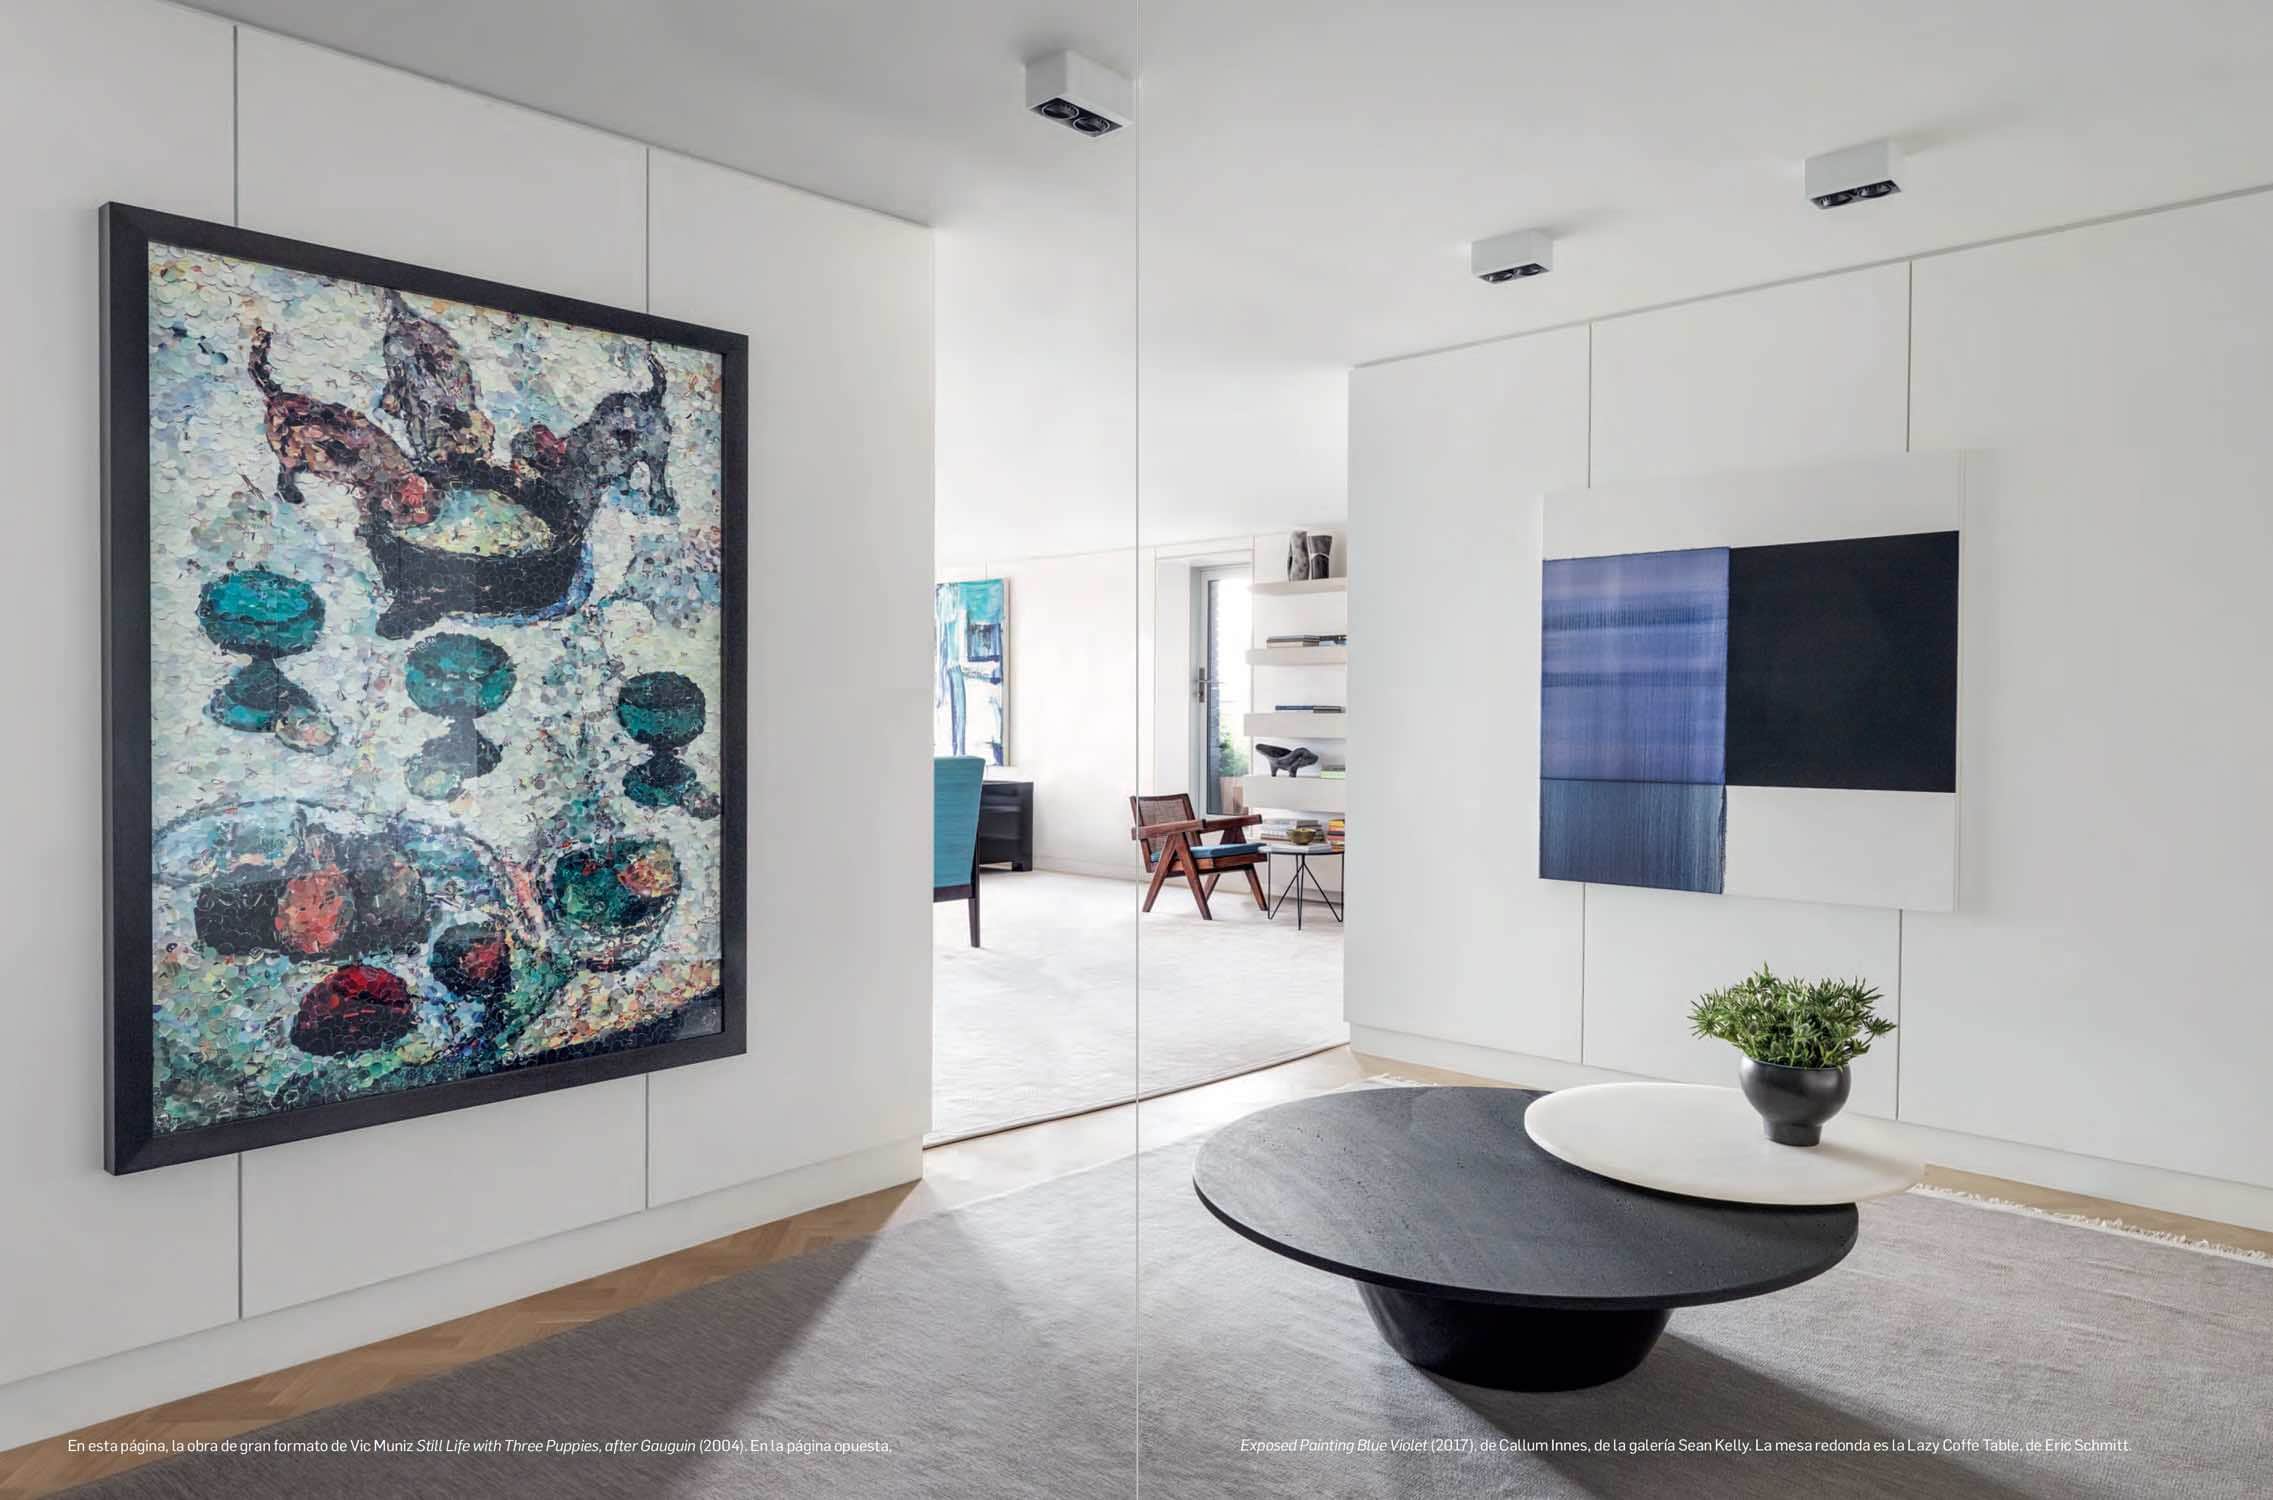 Photograph of a library designed by Carol Egan Interiors with Exposed Painting Delft Blue/Violet by Callum Innes, Artwork by Vik Muniz and Lazy Moon coffee table by Eric Schmitt.